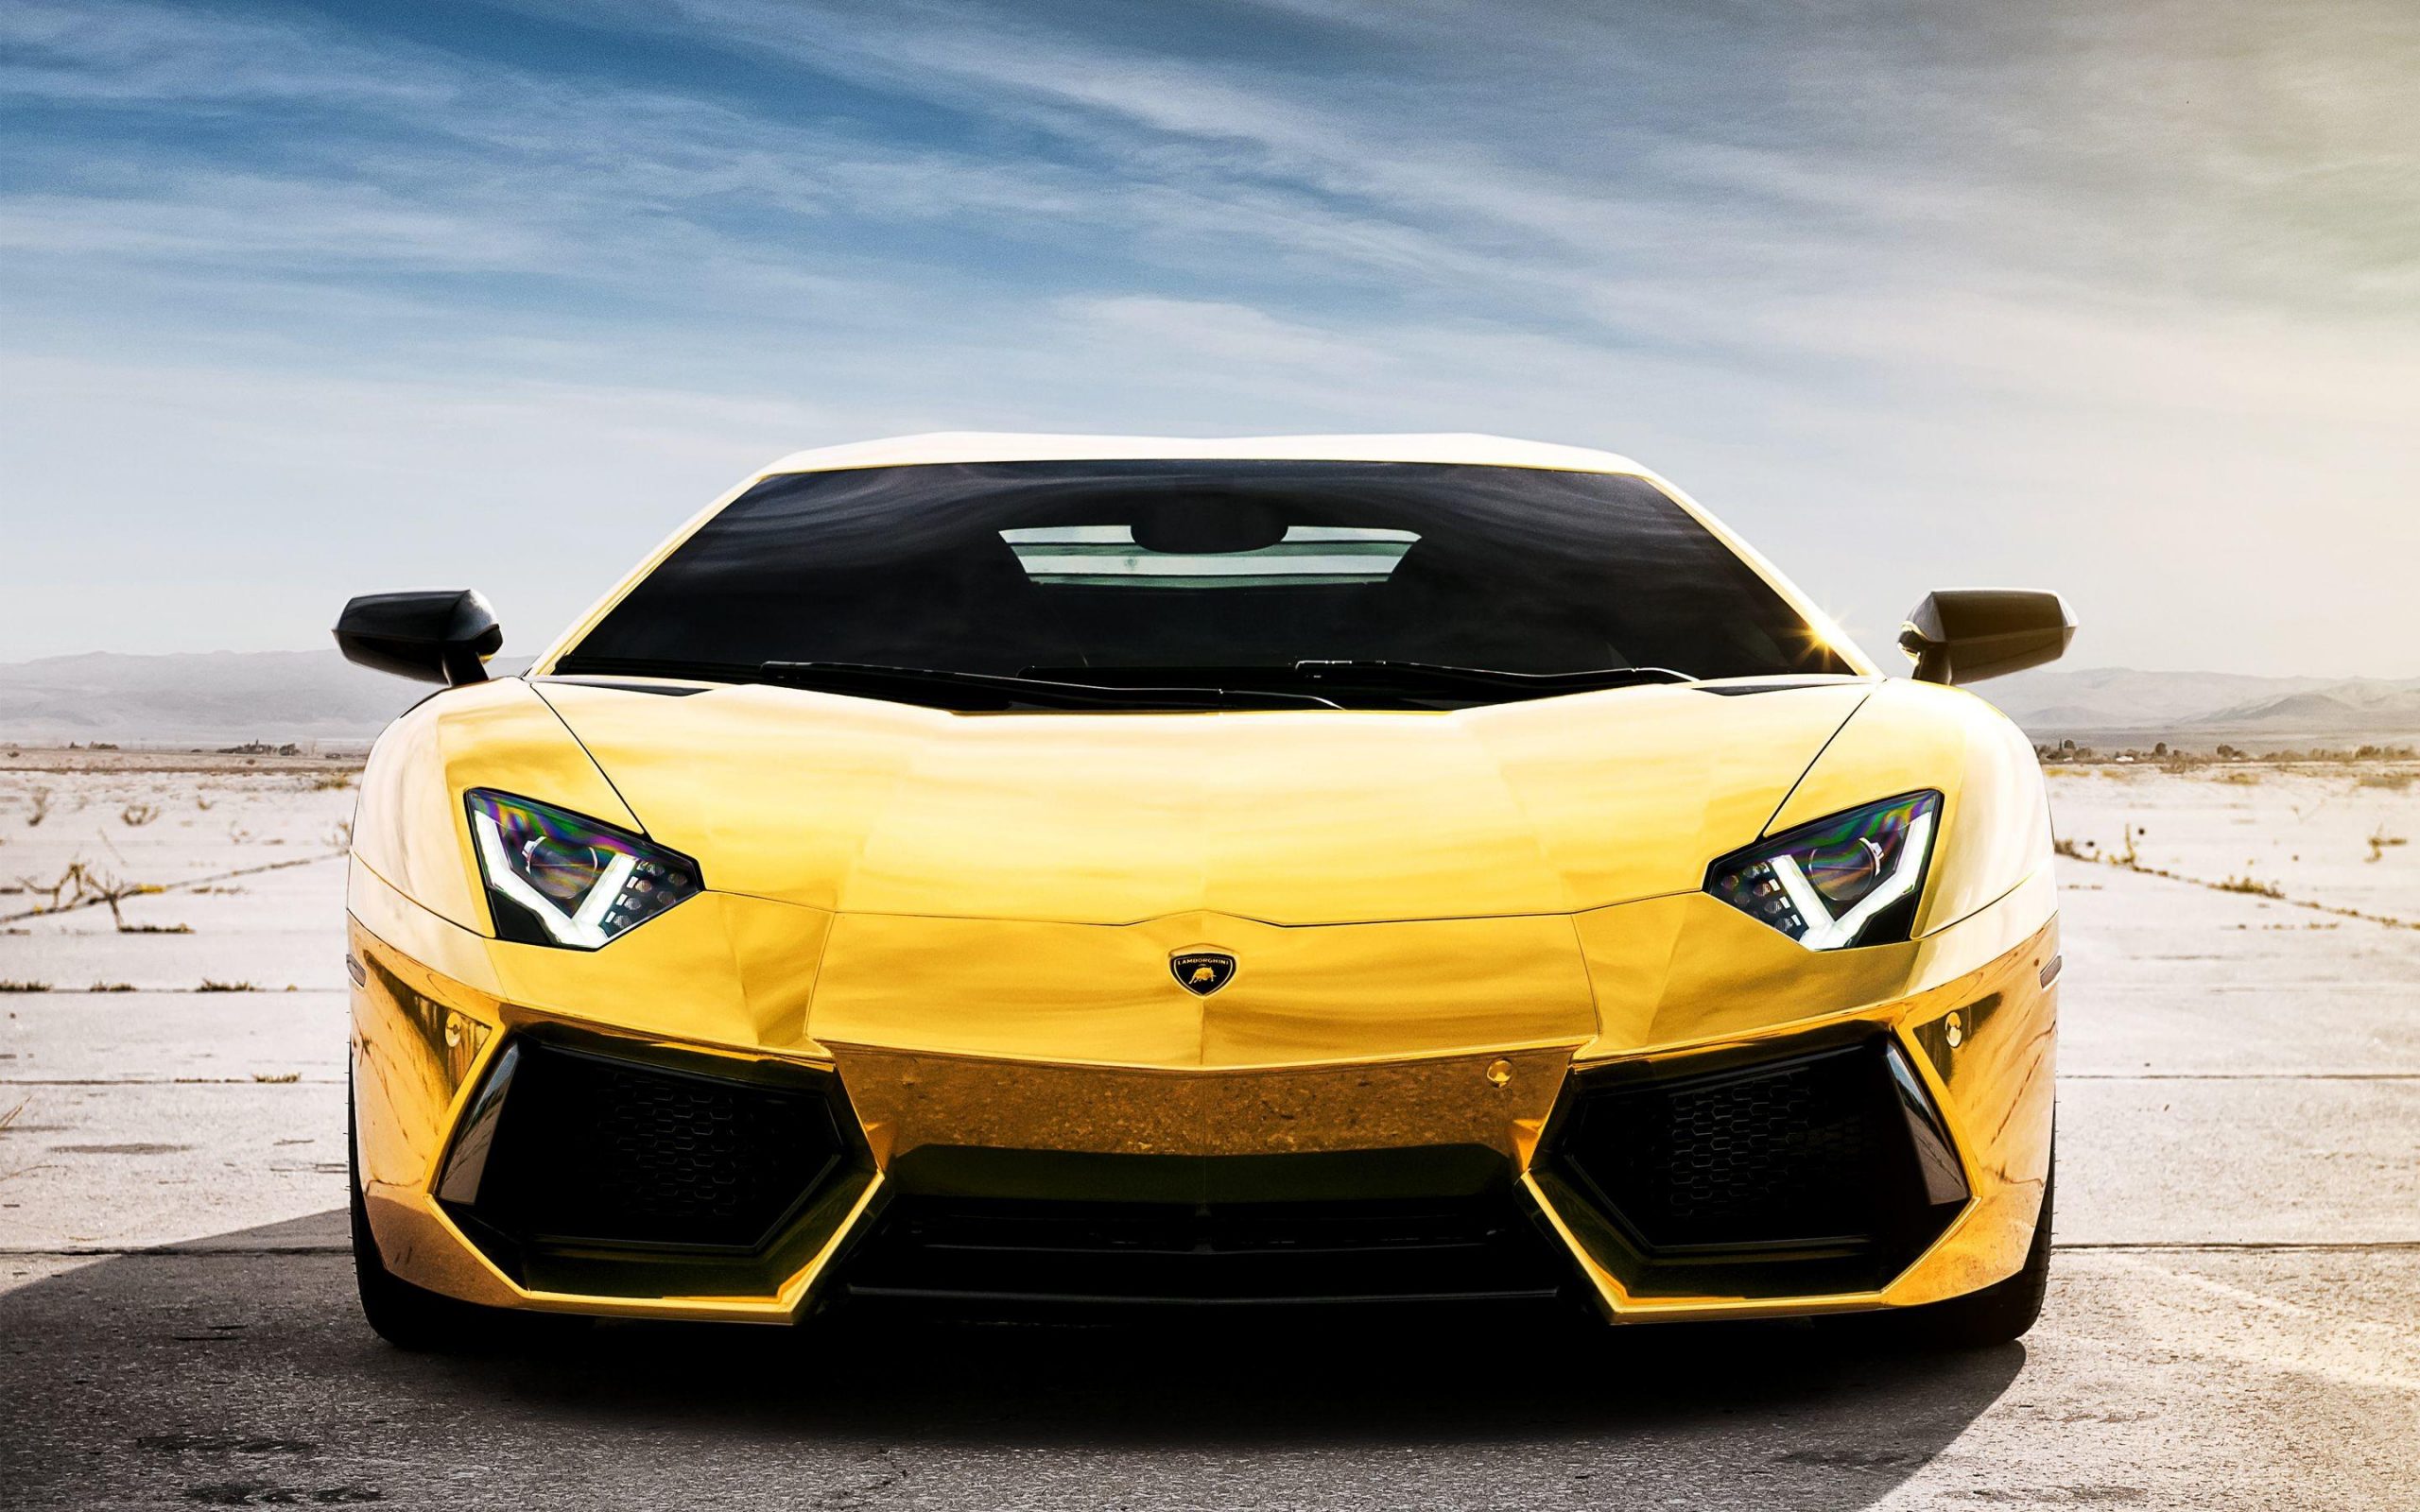 Black and Gold Car Wallpapers HD Free download 